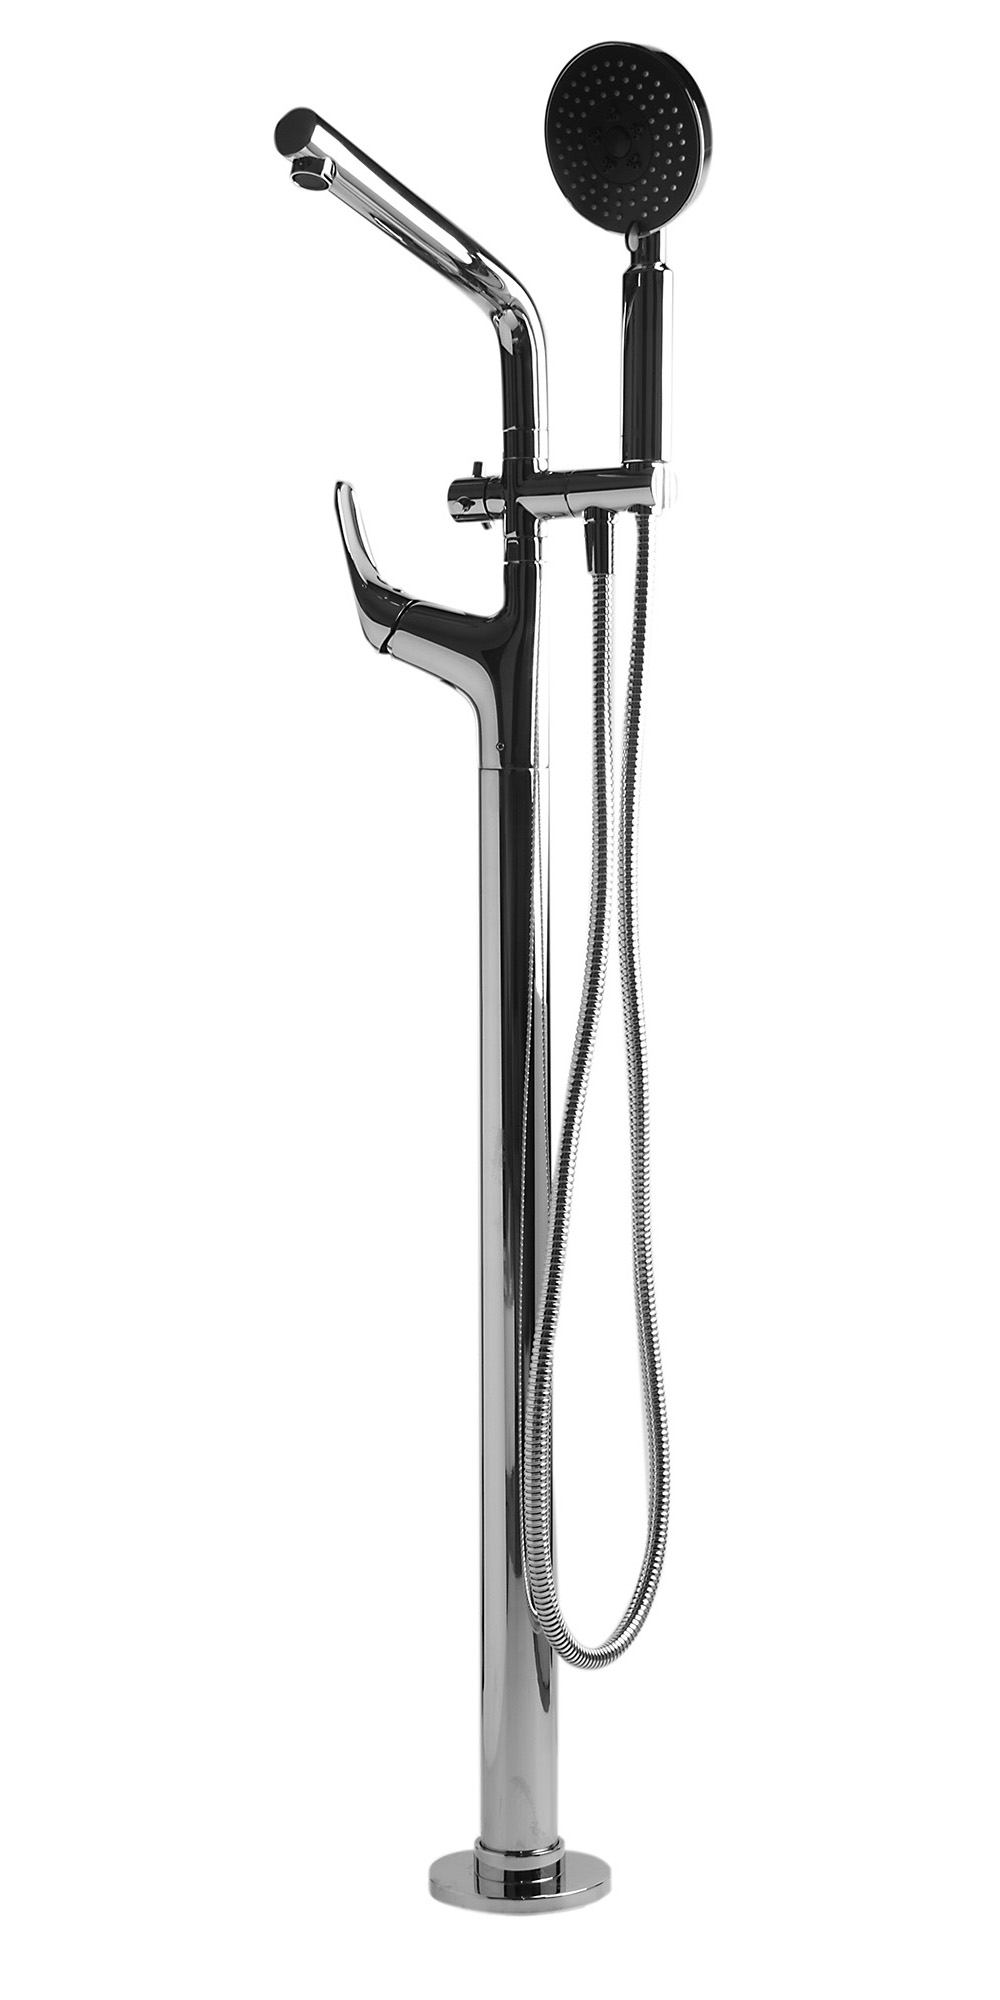 ALFI brand Brass, AB2758-PC Polished Chrome Floor Mounted Tub Filler + Mixer /w additional Hand Held Shower Head